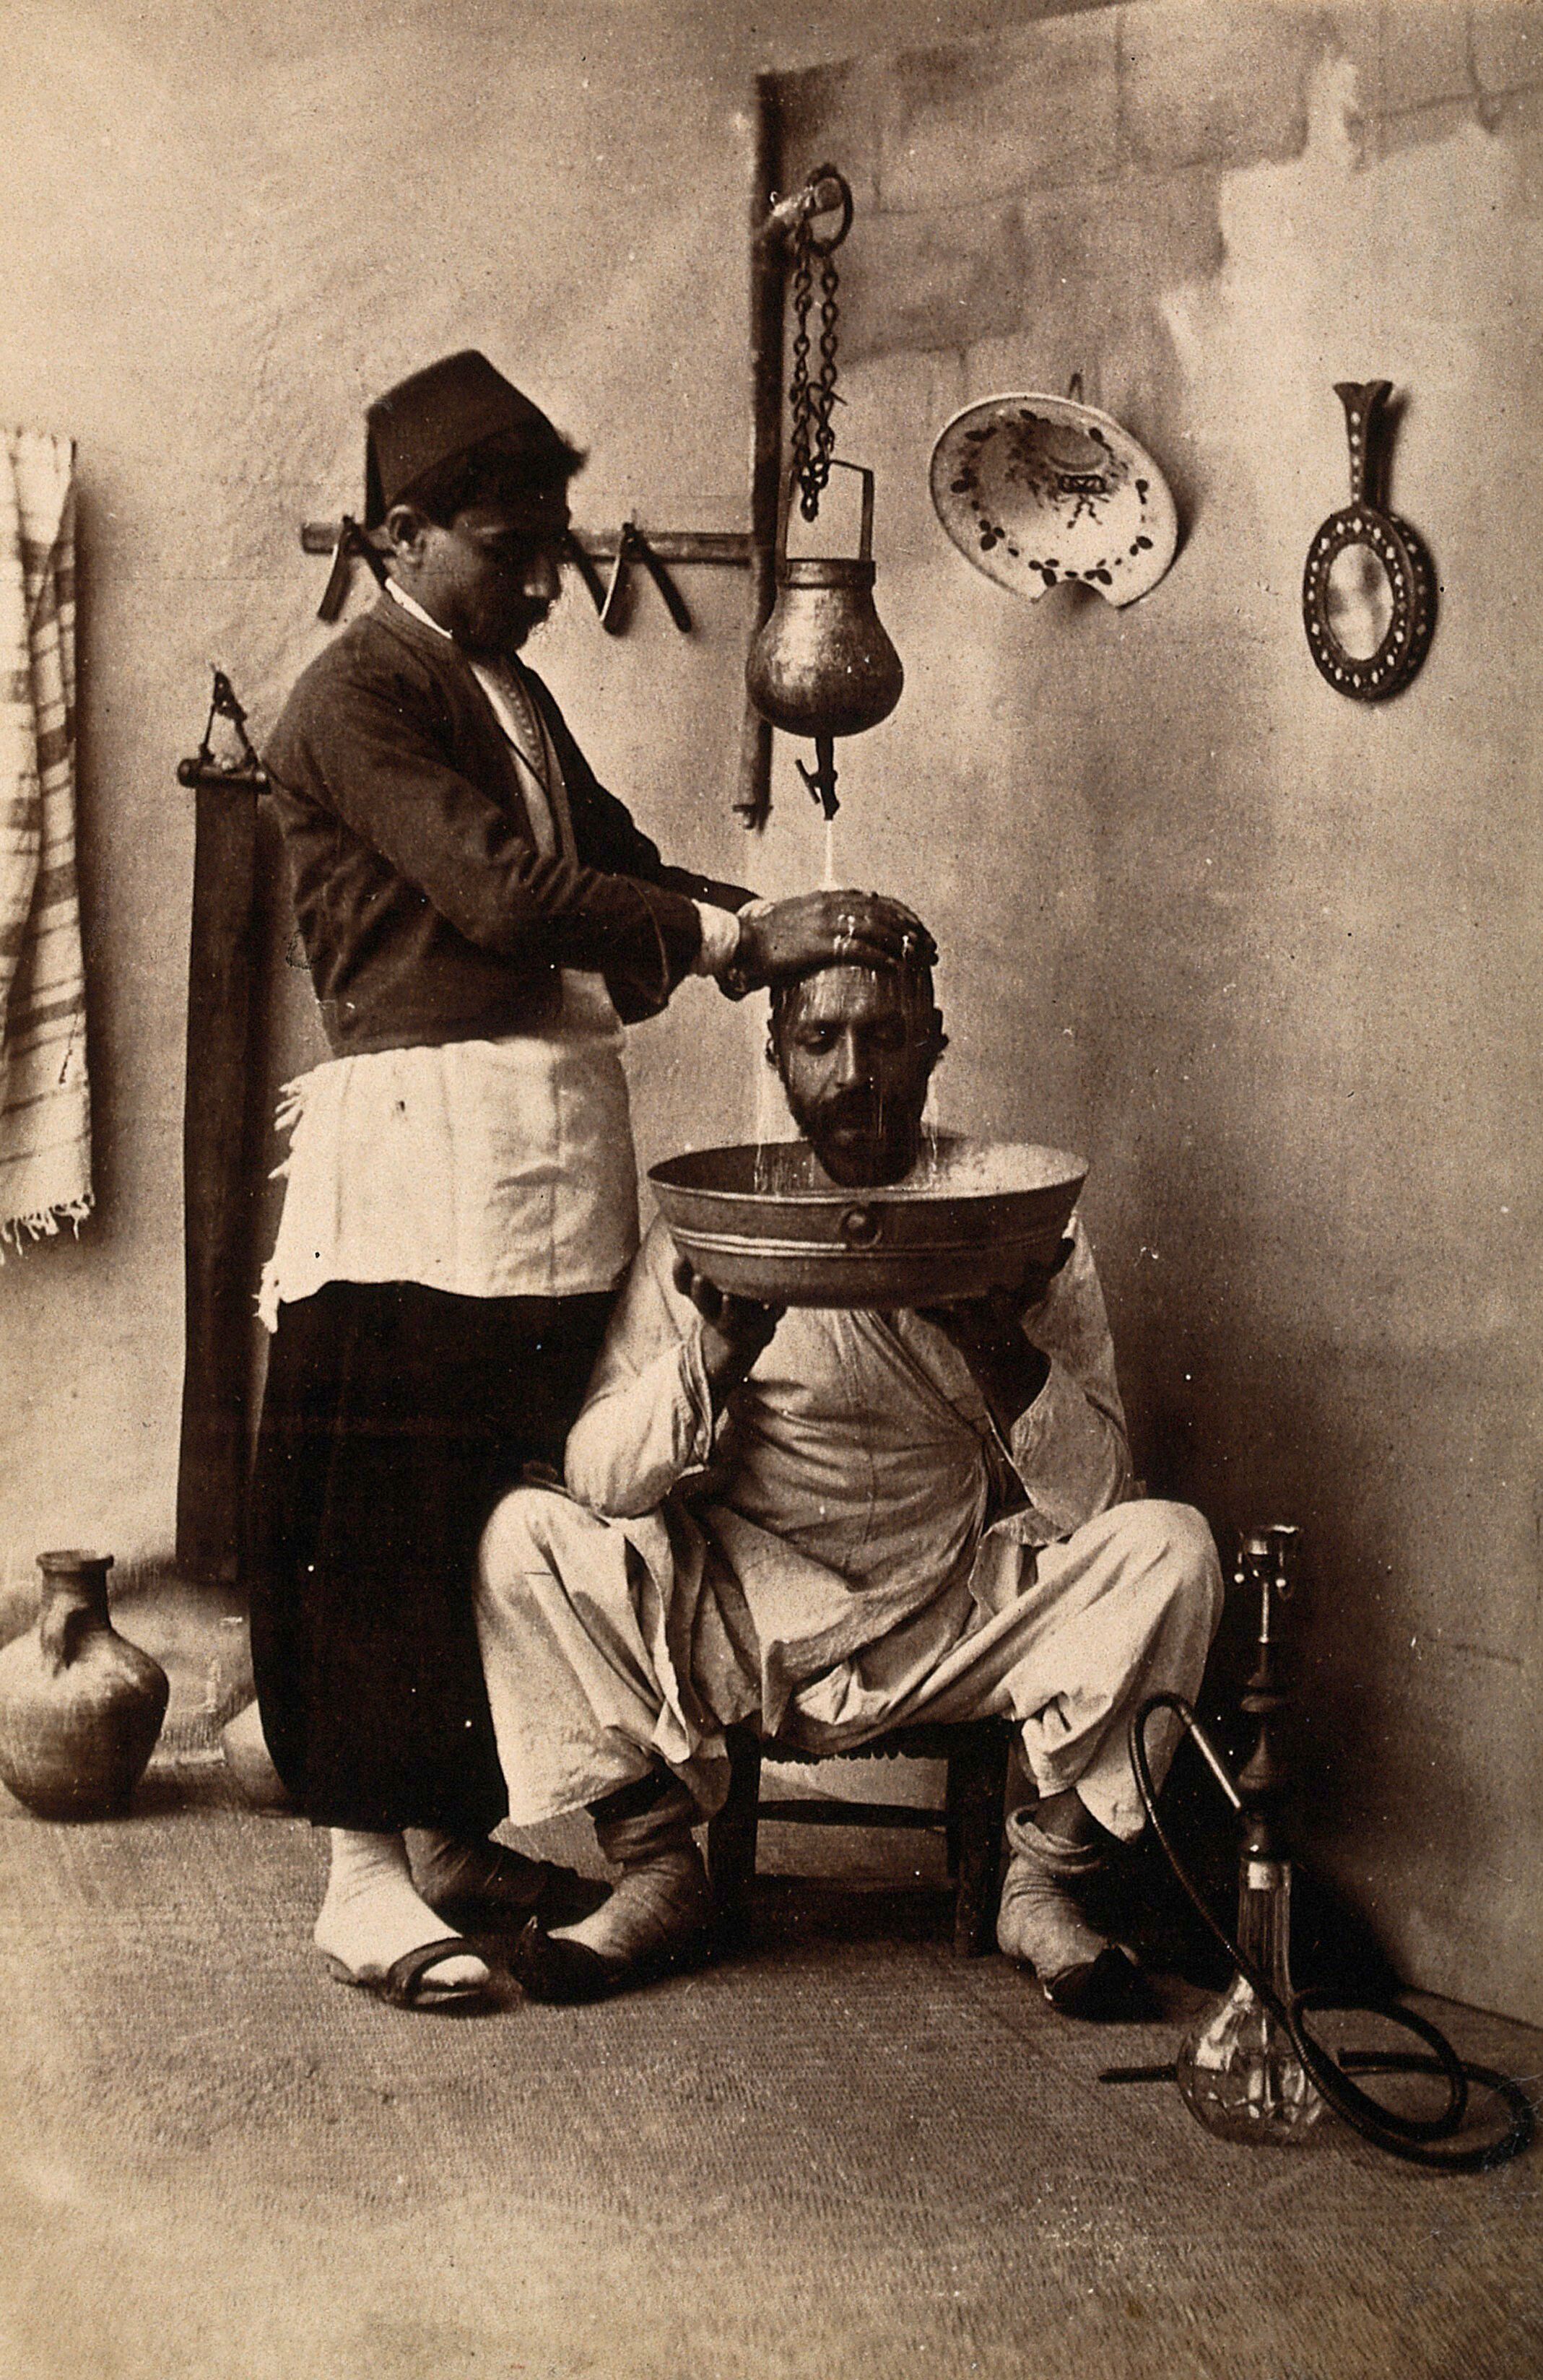 North Africa: a man in a barber's shop having his washed. Photograph, ca. 1900 (?). | Wellcome Collection